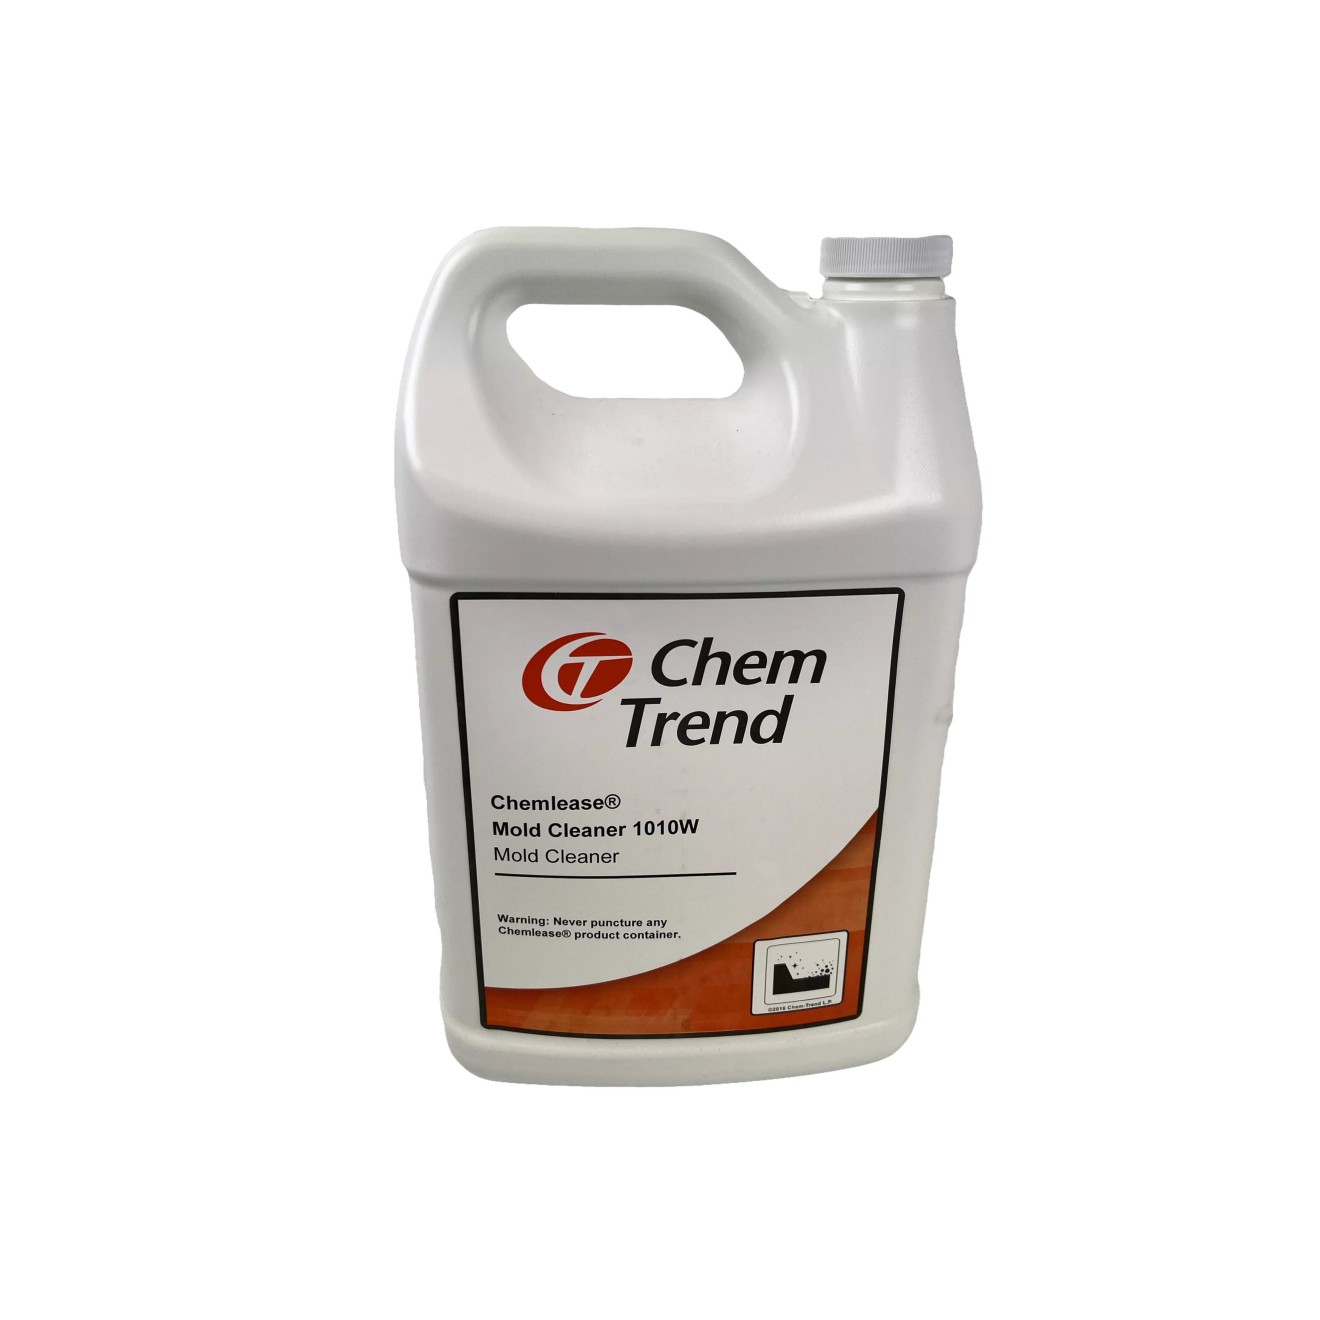 Chemlease Mold Cleaner 1010W [4L x 4]